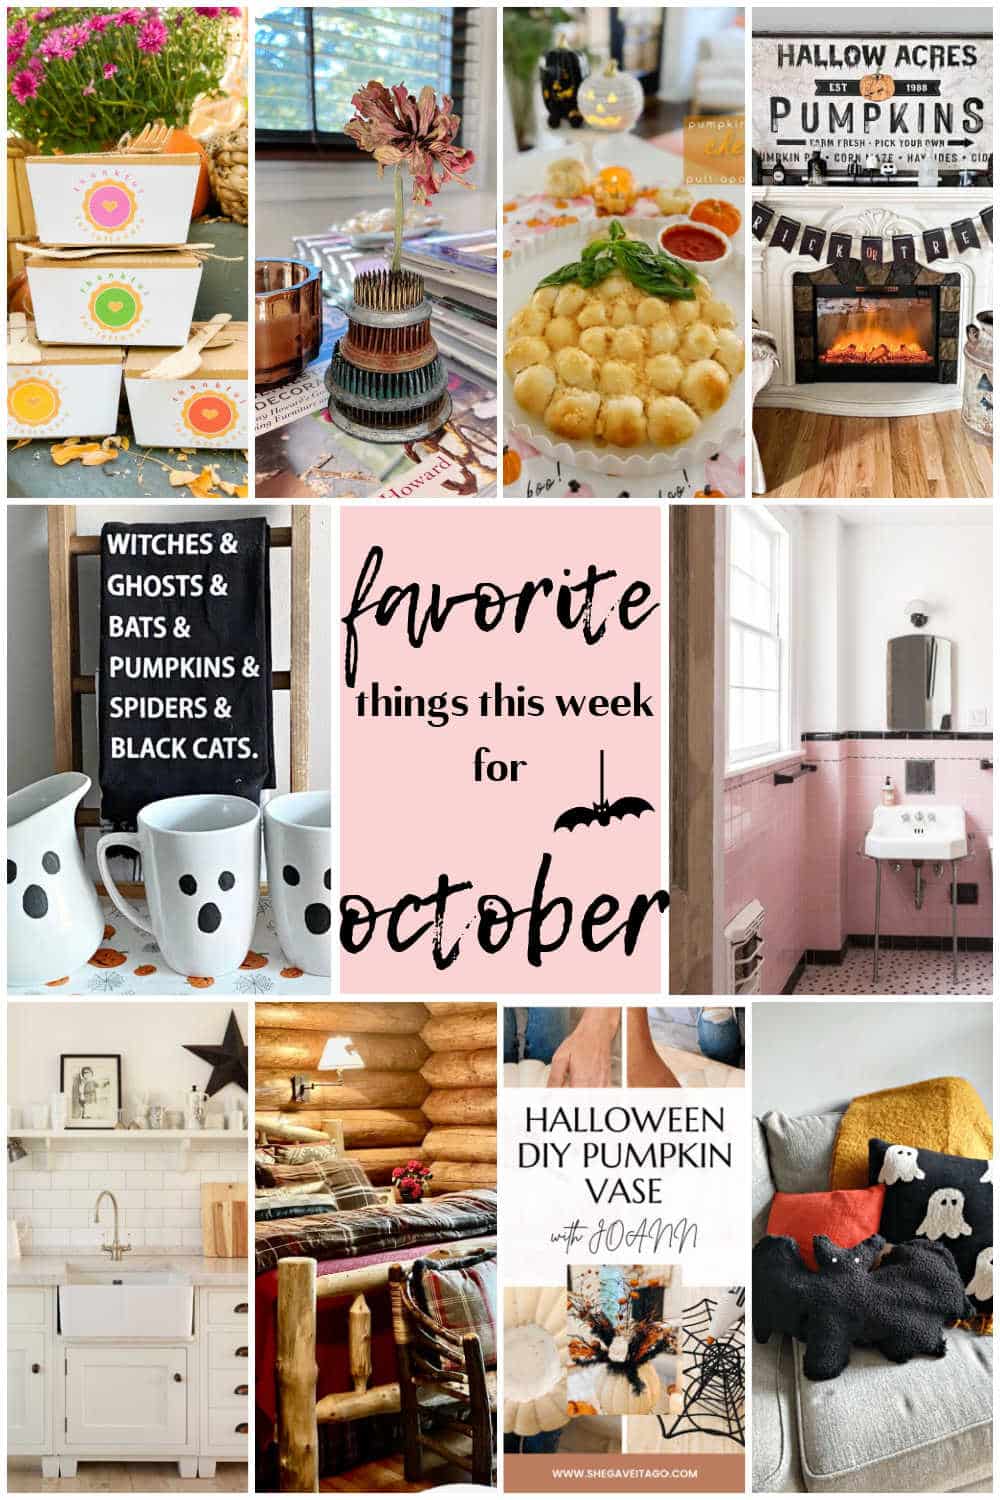 Favorite Things This Week - October. Get cozy with these Halloween decorating, recipes and cozy October ideas